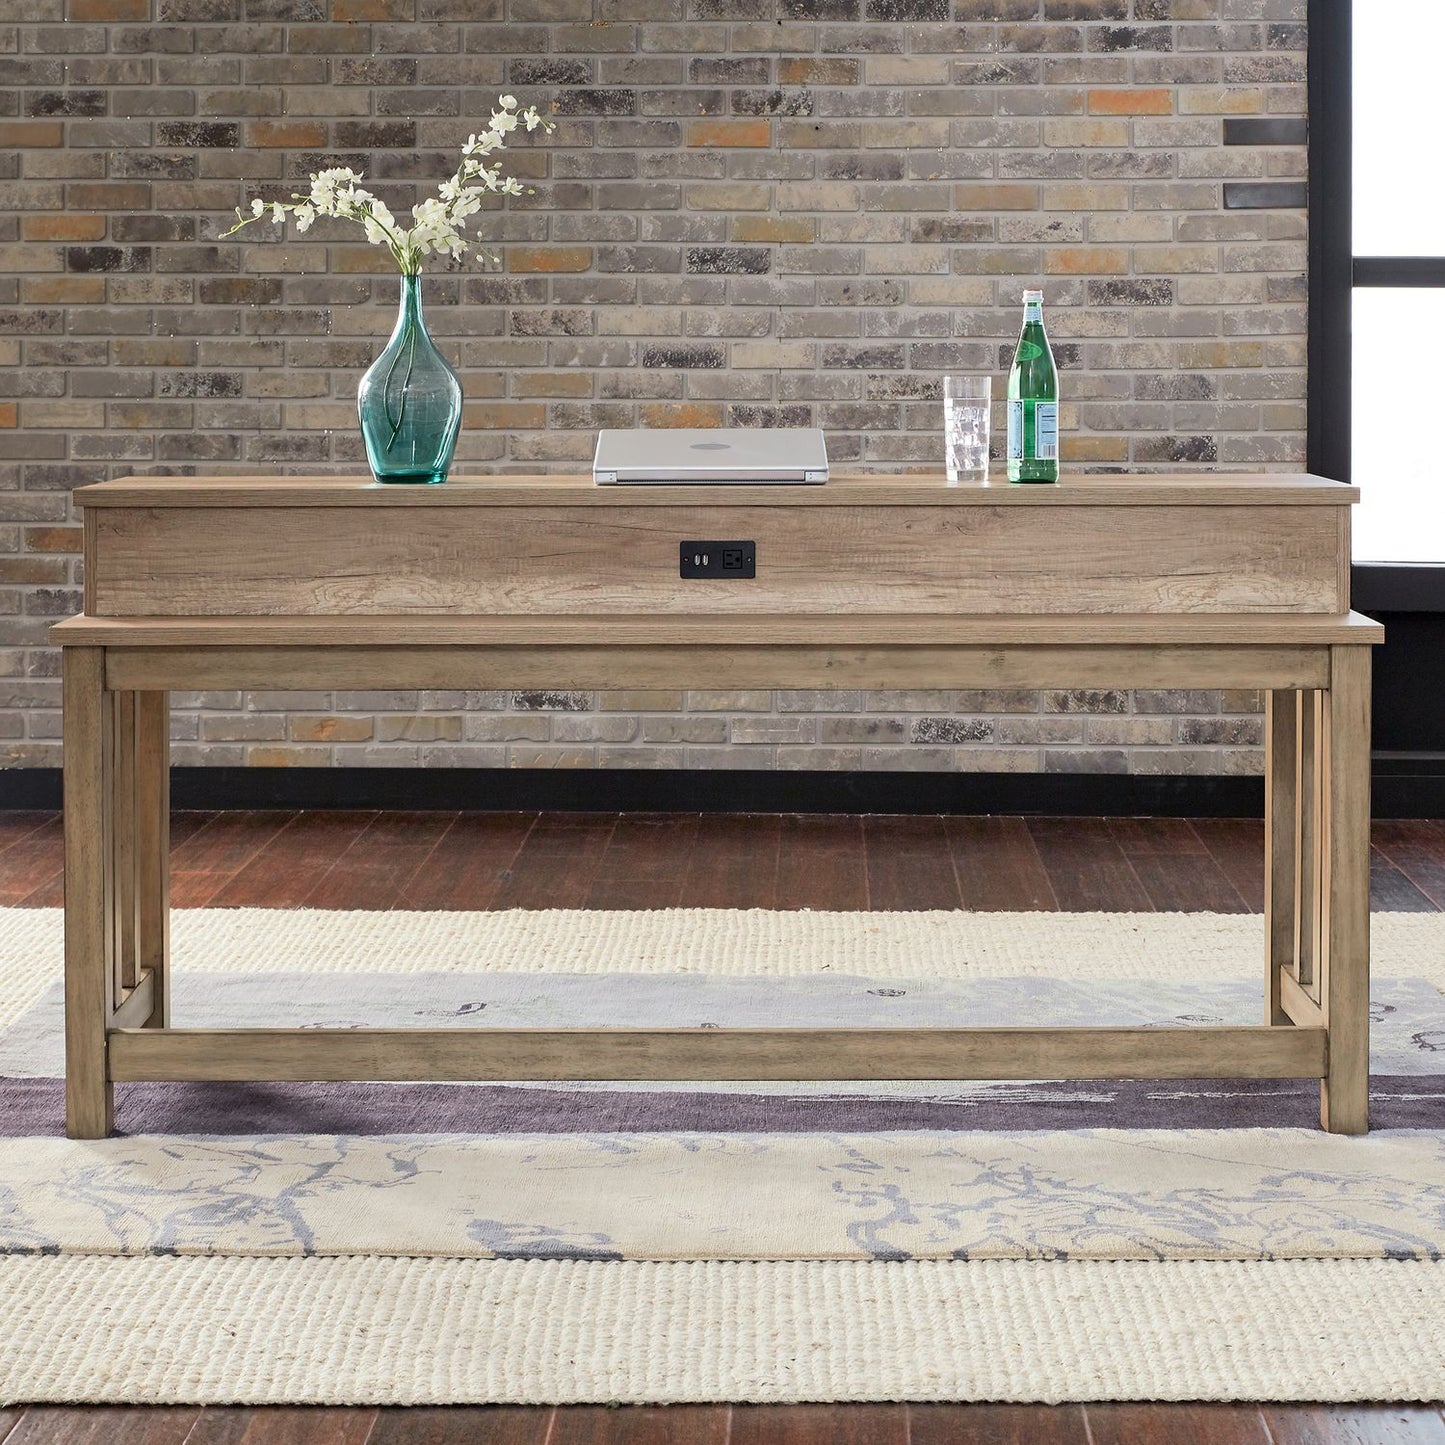 Sun Valley Console Table & Stools